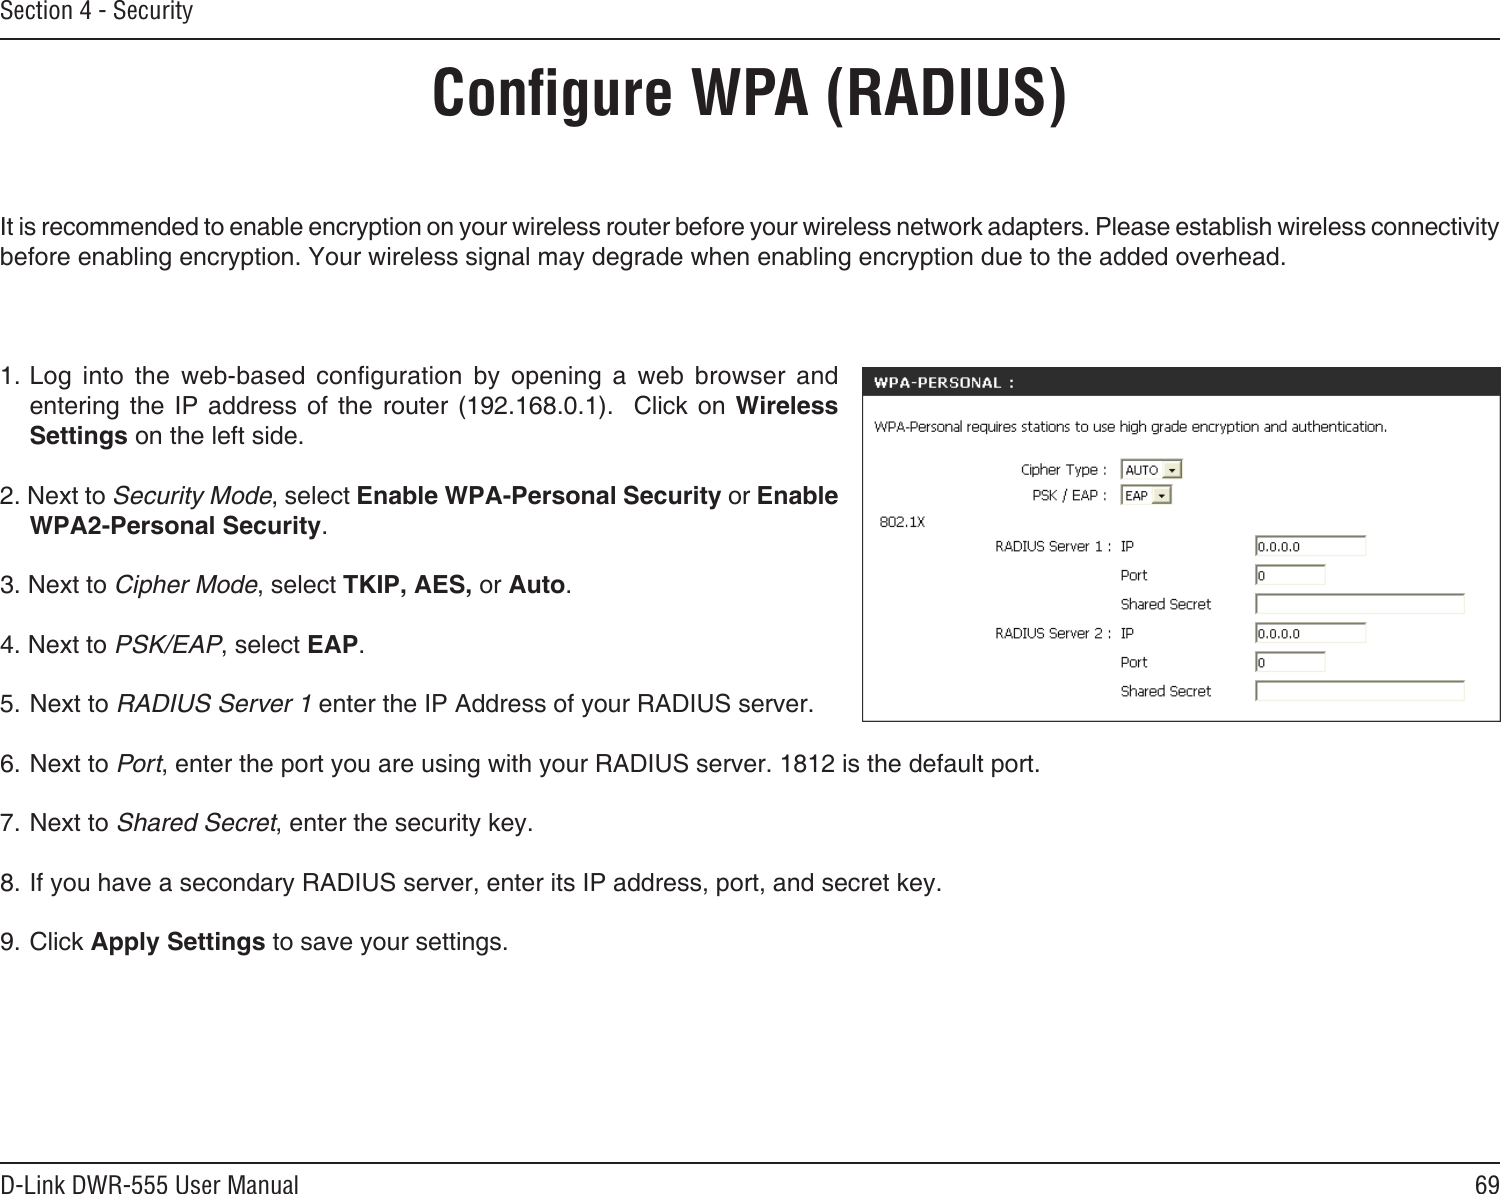 69D-Link DWR-555 User ManualSection 4 - SecurityConﬁgure WPA (RADIUS)It is recommended to enable encryption on your wireless router before your wireless network adapters. Please establish wireless connectivity before enabling encryption. Your wireless signal may degrade when enabling encryption due to the added overhead.1. Log  into  the  web-based  conguration  by  opening  a  web  browser  and entering  the  IP  address  of  the  router  (192.168.0.1).    Click  on  Wireless Settings on the left side.2. Next to Security Mode, select Enable WPA-Personal Security or Enable WPA2-Personal Security.3. Next to Cipher Mode, select TKIP, AES, or Auto.4. Next to PSK/EAP, select EAP.5. Next to RADIUS Server 1 enter the IP Address of your RADIUS server.6. Next to Port, enter the port you are using with your RADIUS server. 1812 is the default port.7. Next to Shared Secret, enter the security key.8. If you have a secondary RADIUS server, enter its IP address, port, and secret key.9. Click Apply Settings to save your settings.